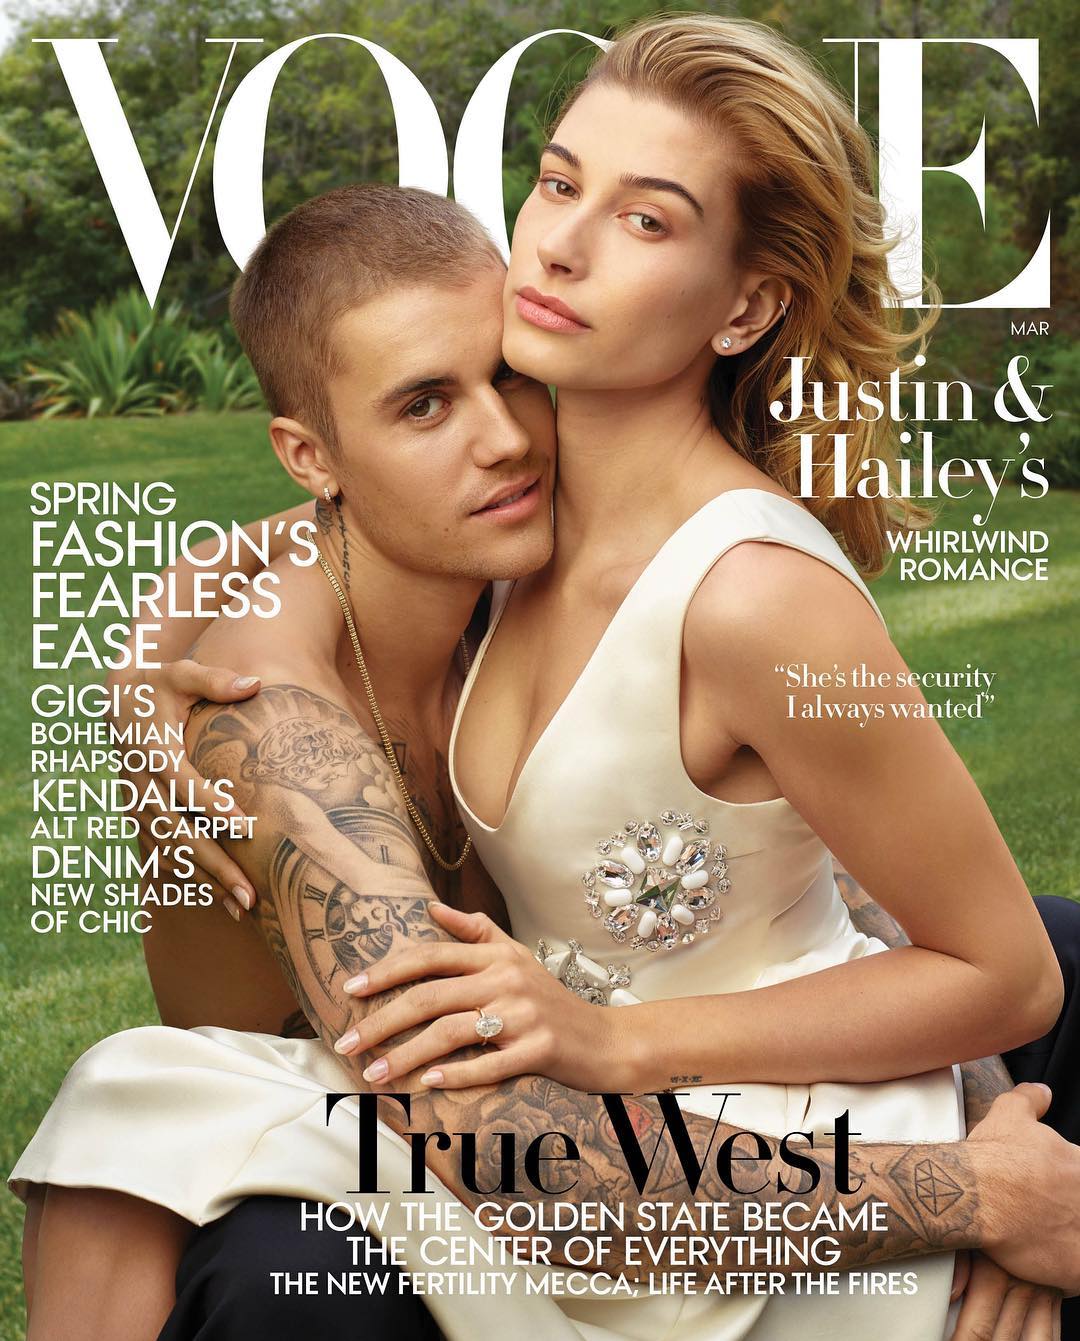 Justin Bieber and Hailey Bieber are drenched in white love on the cover of Vogue's March 2019 issue